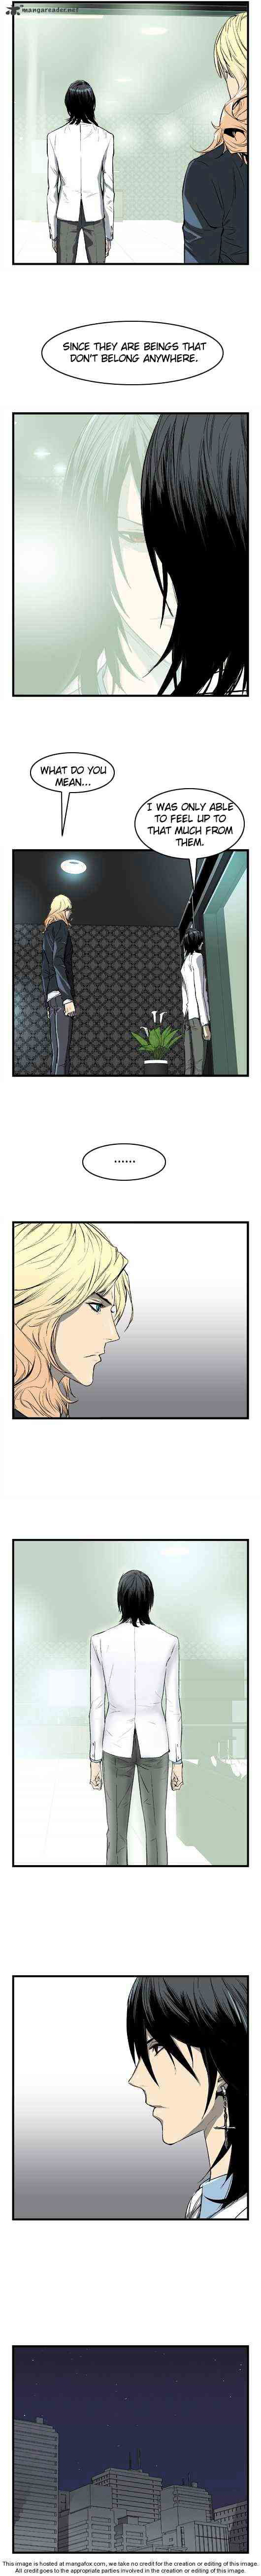 Noblesse Chapter 31 _ Chapters 31-45 page 23